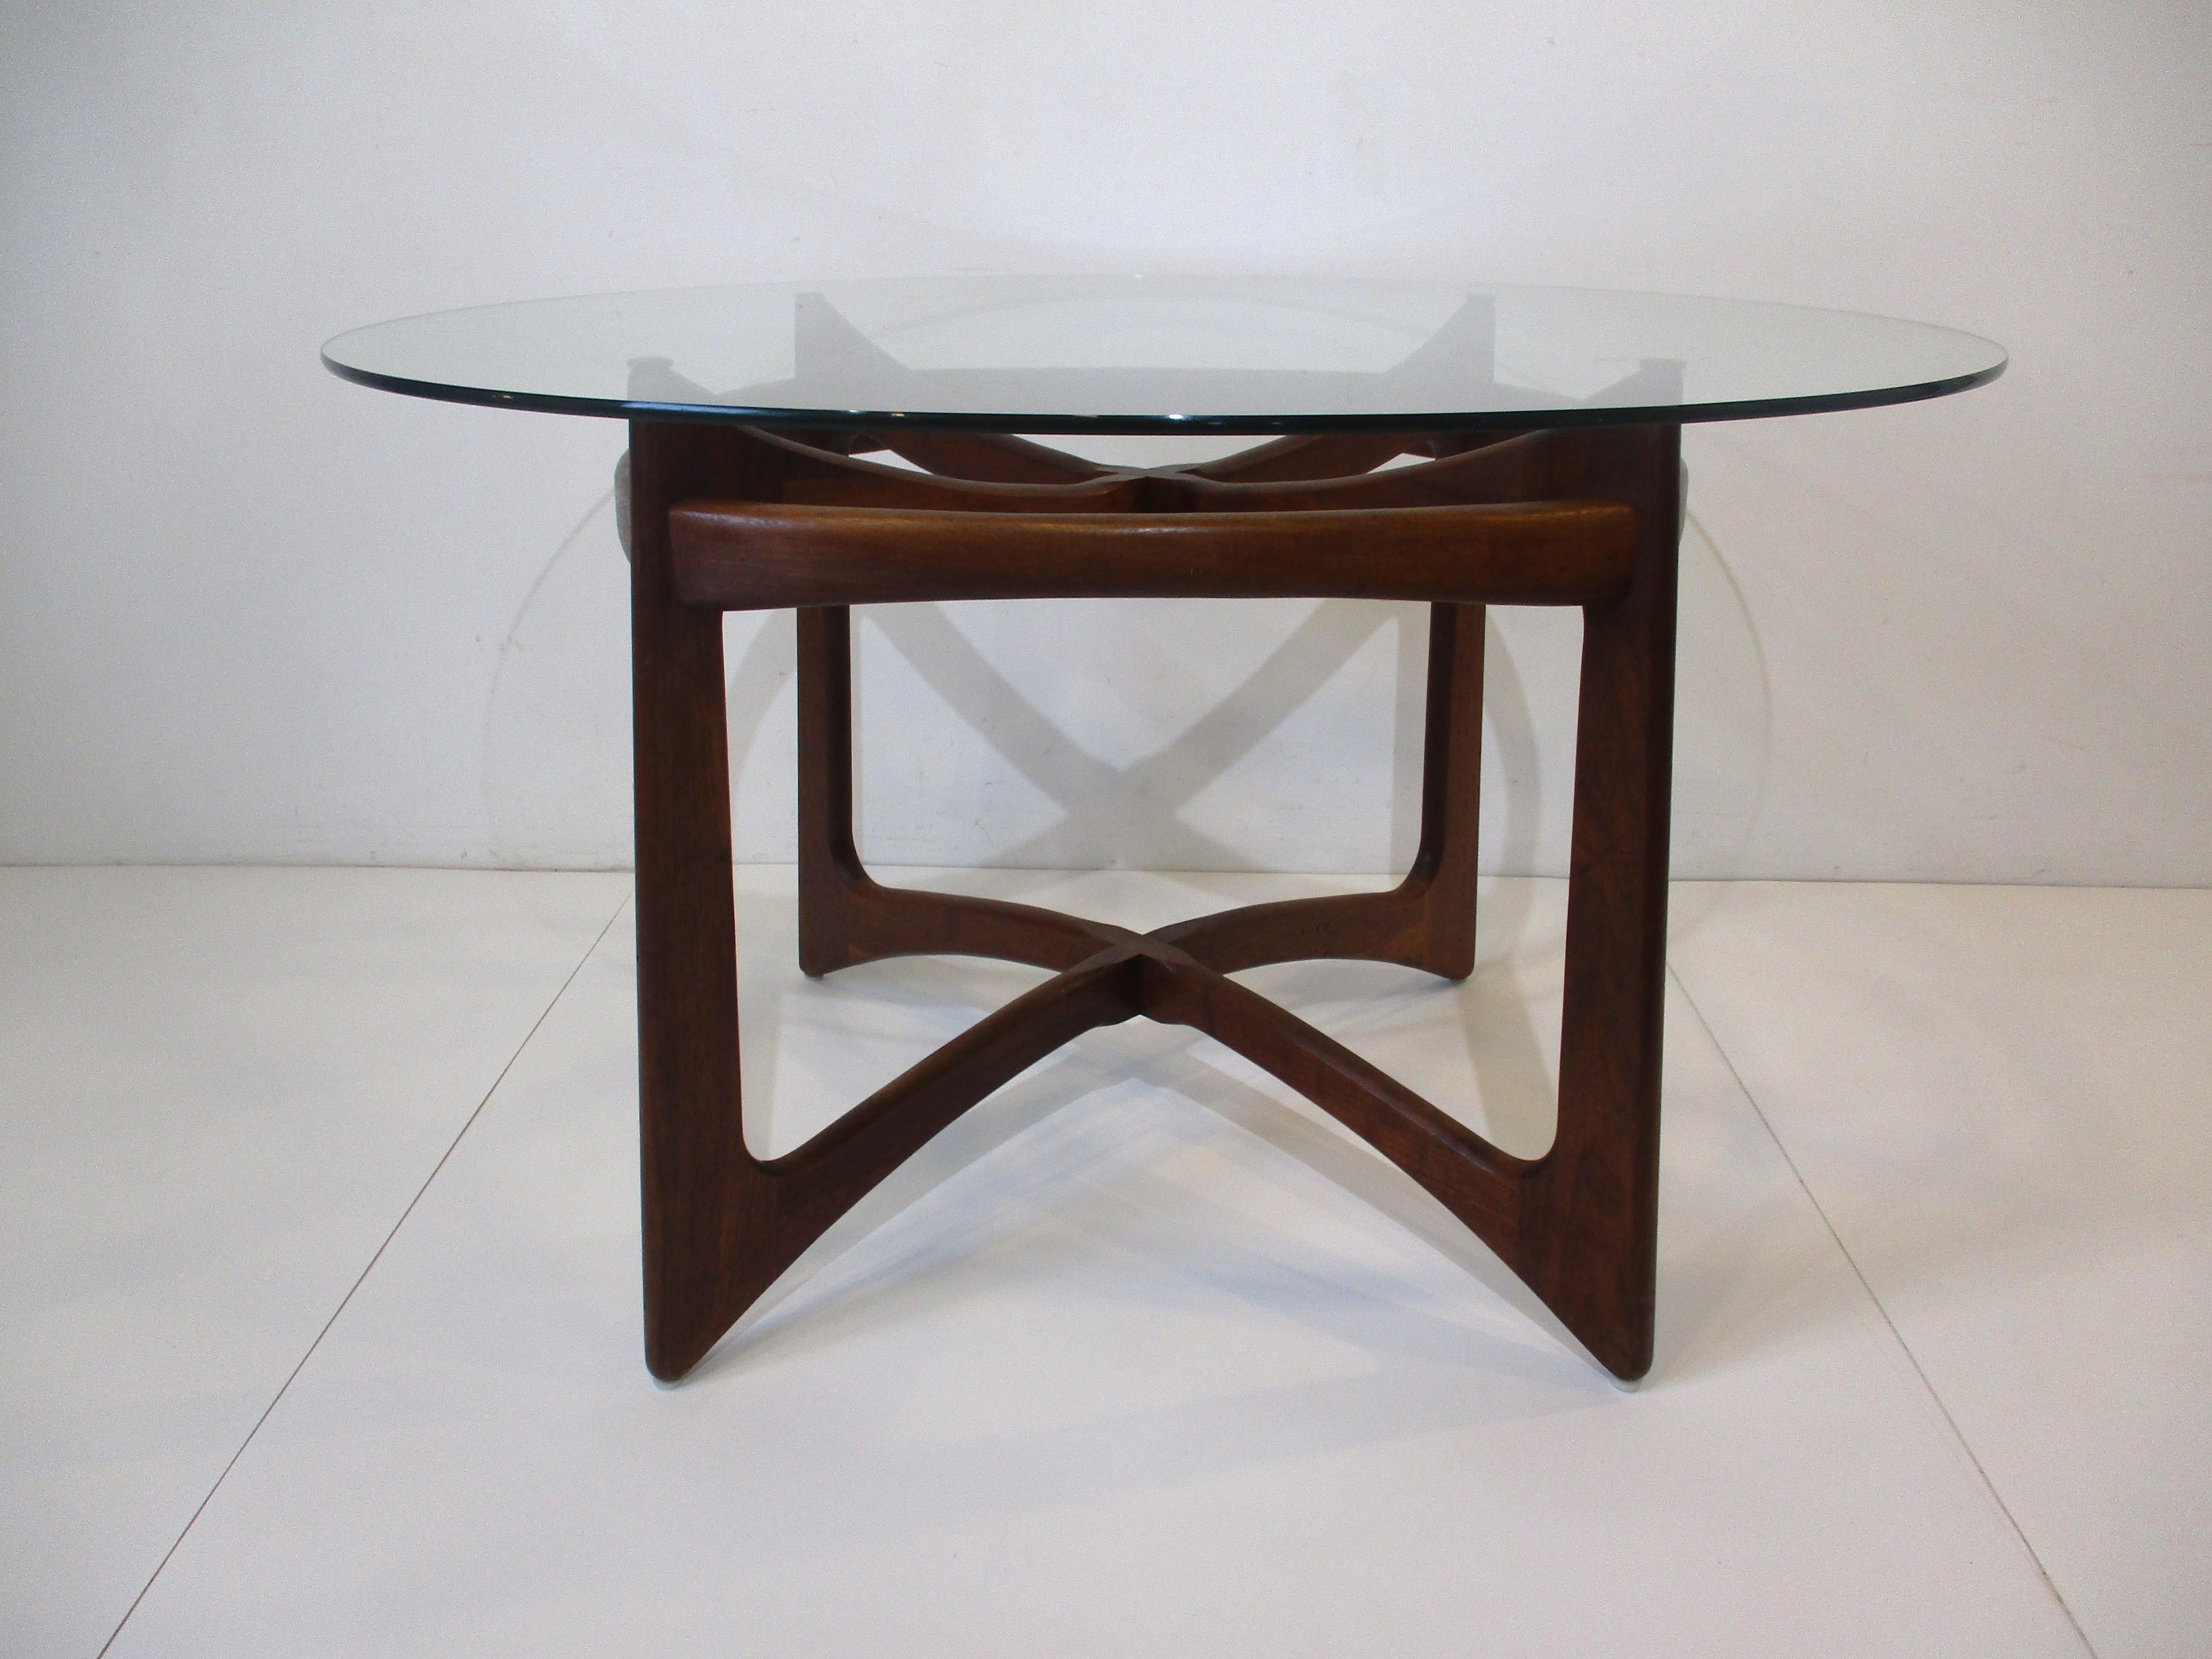 A sculptural solid walnut based ribbon styled dining table with round glass top designed by Adrian Pearsall . A very well organically crafted piece manufactured by Craft Associates showing the beauty of the natural wood in the manner of George